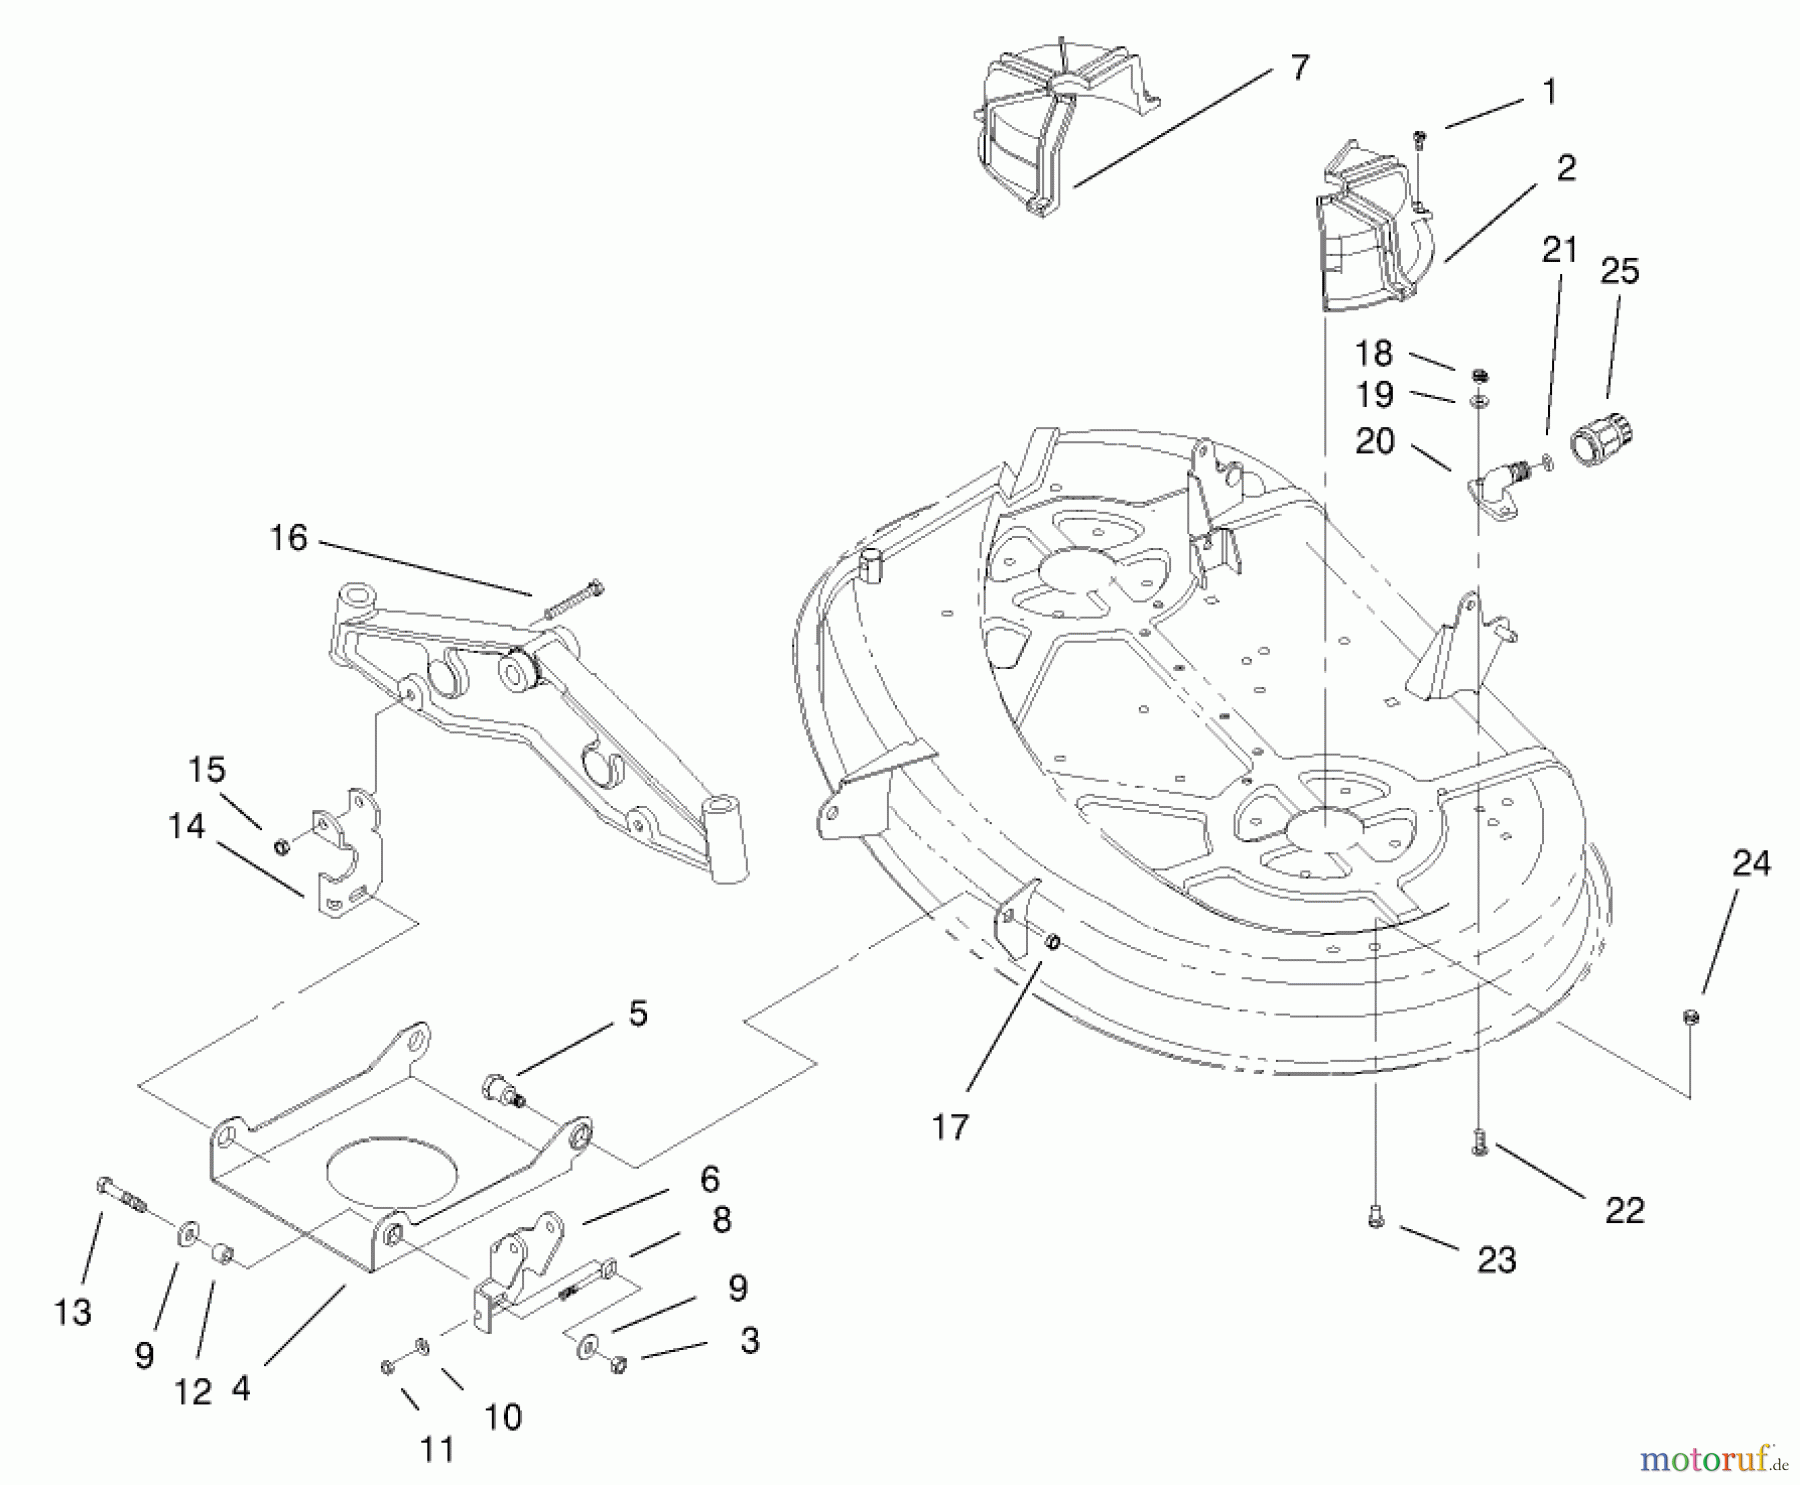  Toro Neu Mowers, Lawn & Garden Tractor Seite 1 71223 (16-38XL) - Toro 16-38XL Lawn Tractor, 2000 (200000001-200999999) HEIGHT OF CUT COMPONENTS ASSEMBLY #3